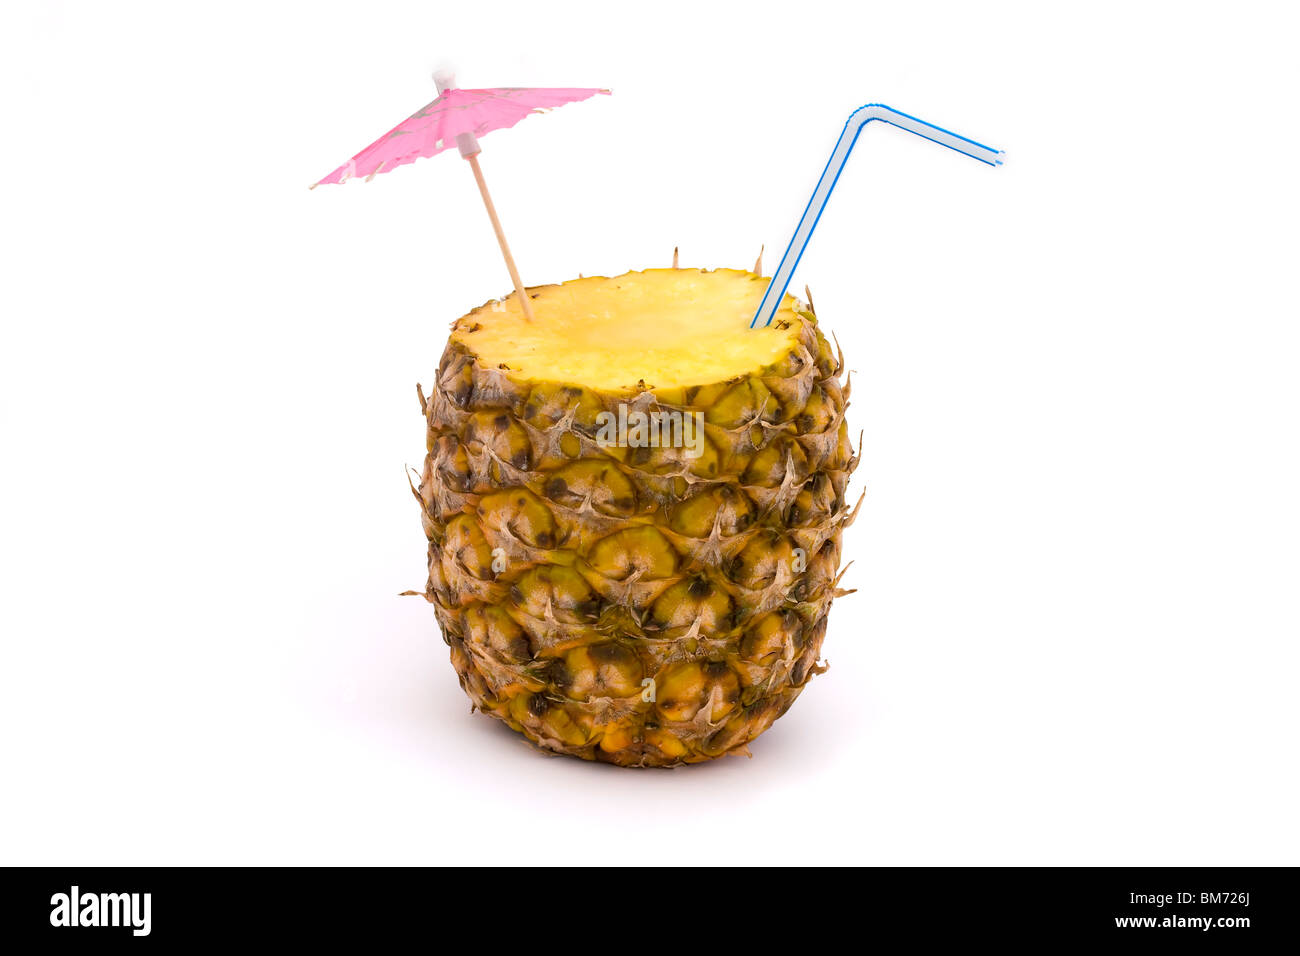 pineapple with straw and umbrella on a white background Stock Photo